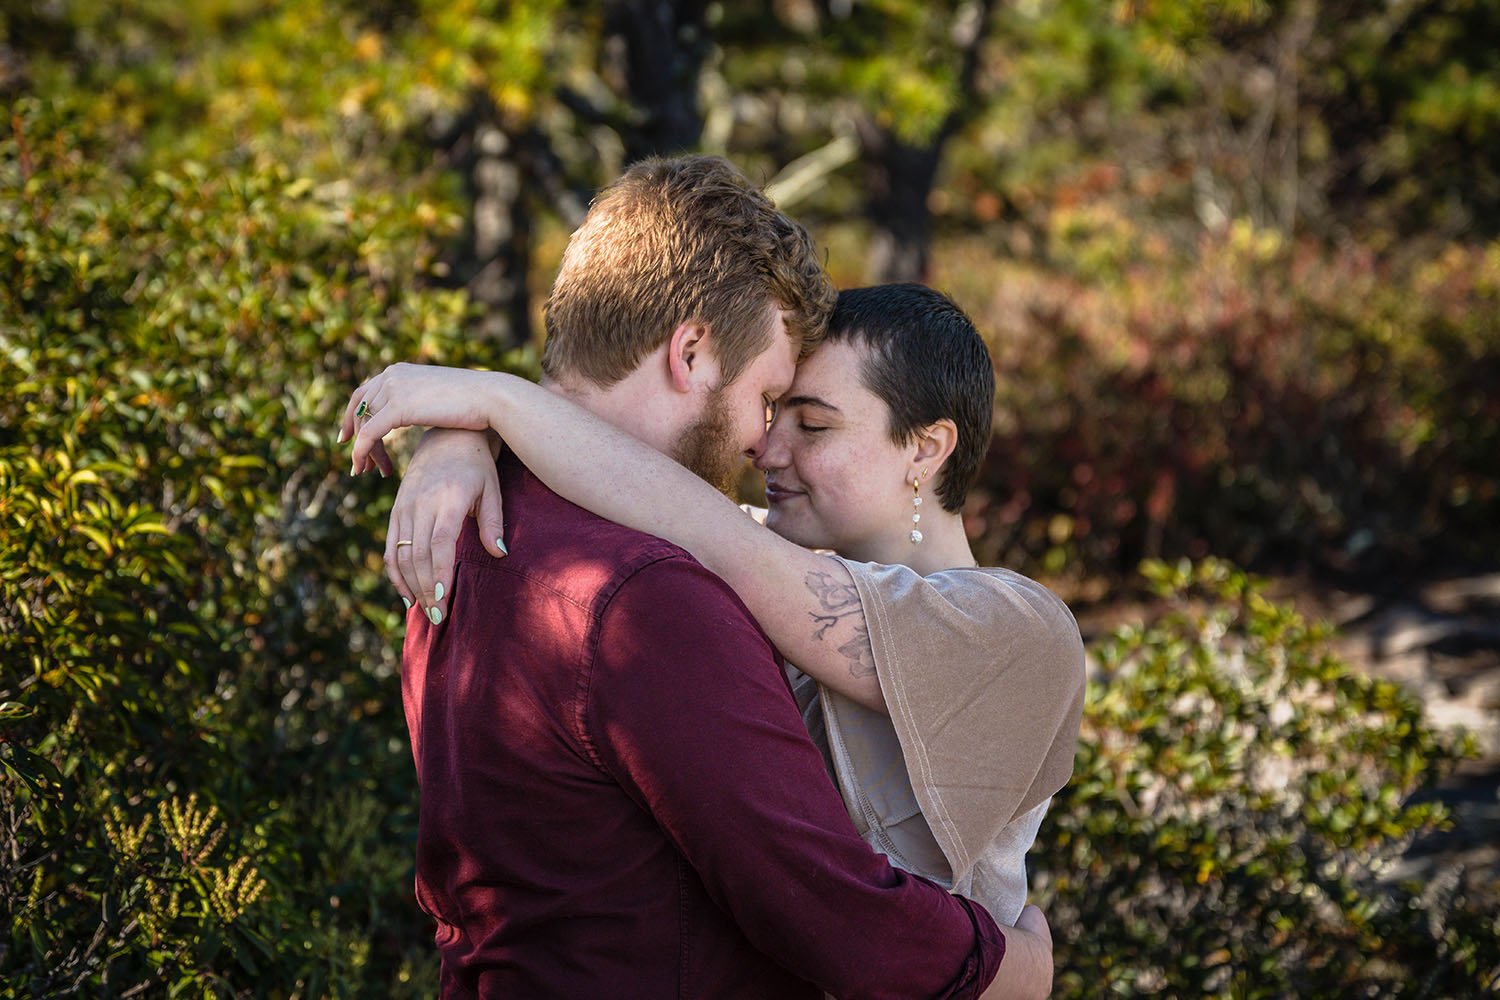 A couple embraces and touch foreheads for a photo.